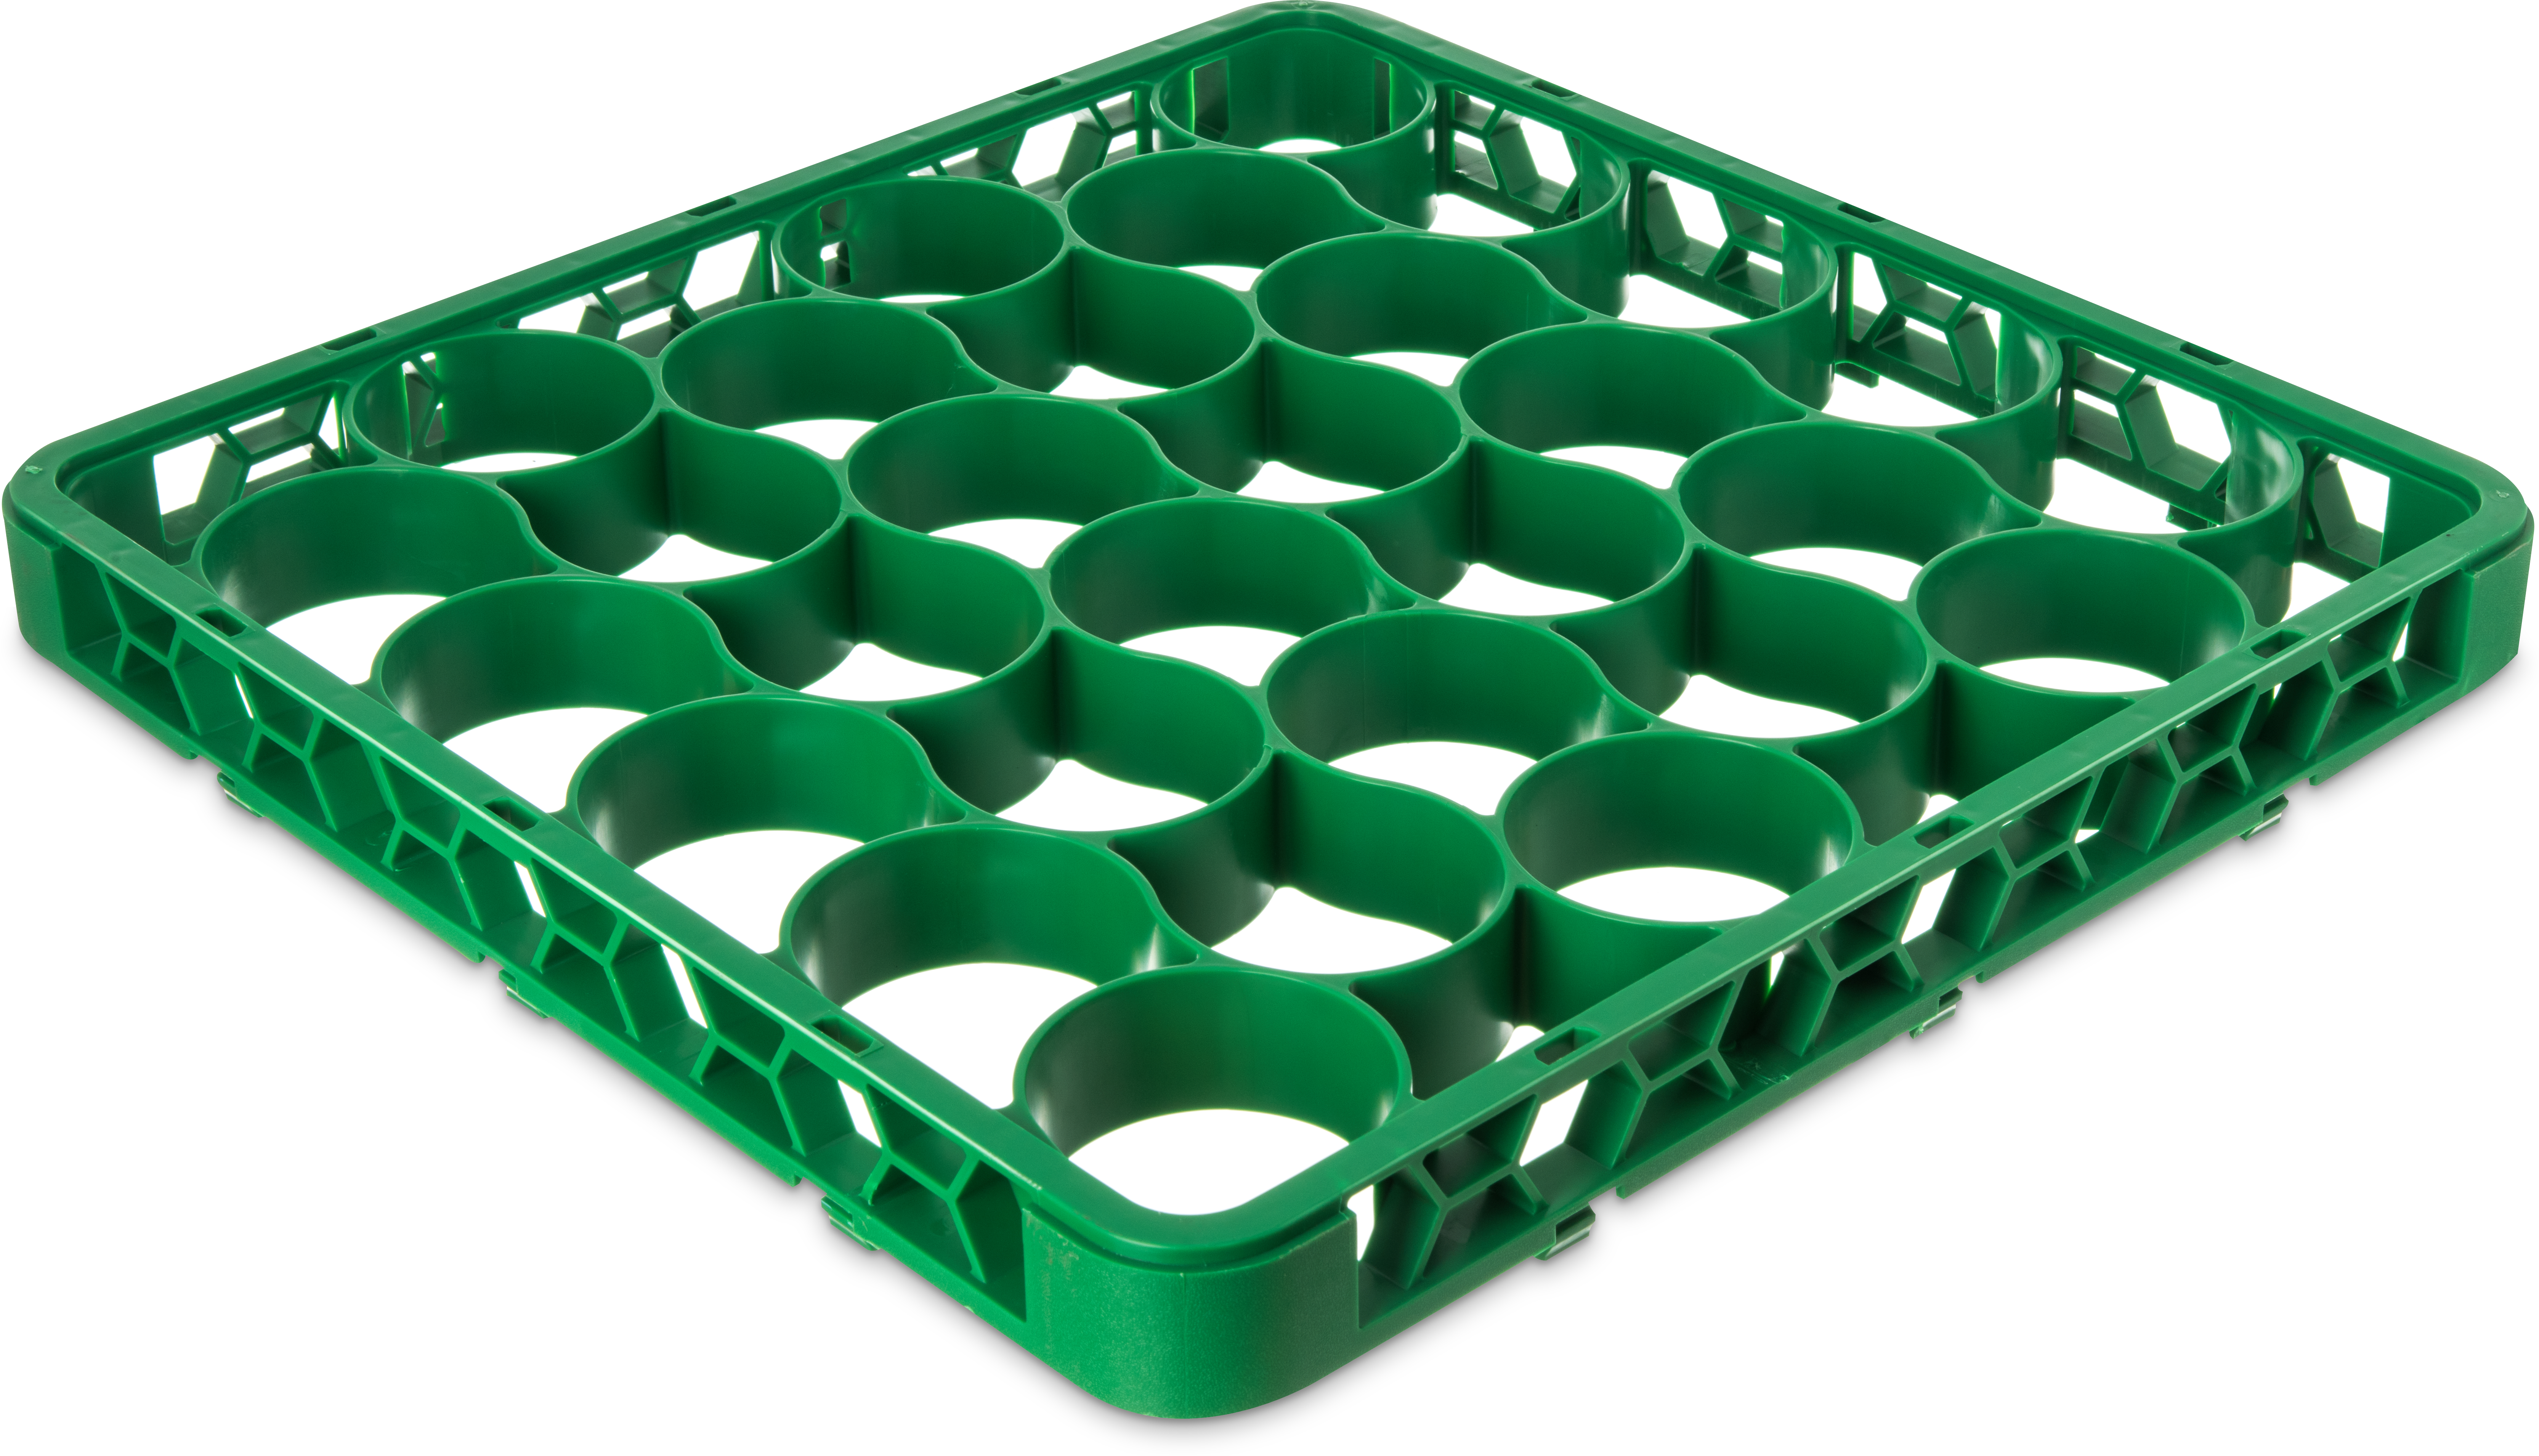 OptiClean NeWave Color-Coded Short Glass Rack Extender 30 Compartment - Green